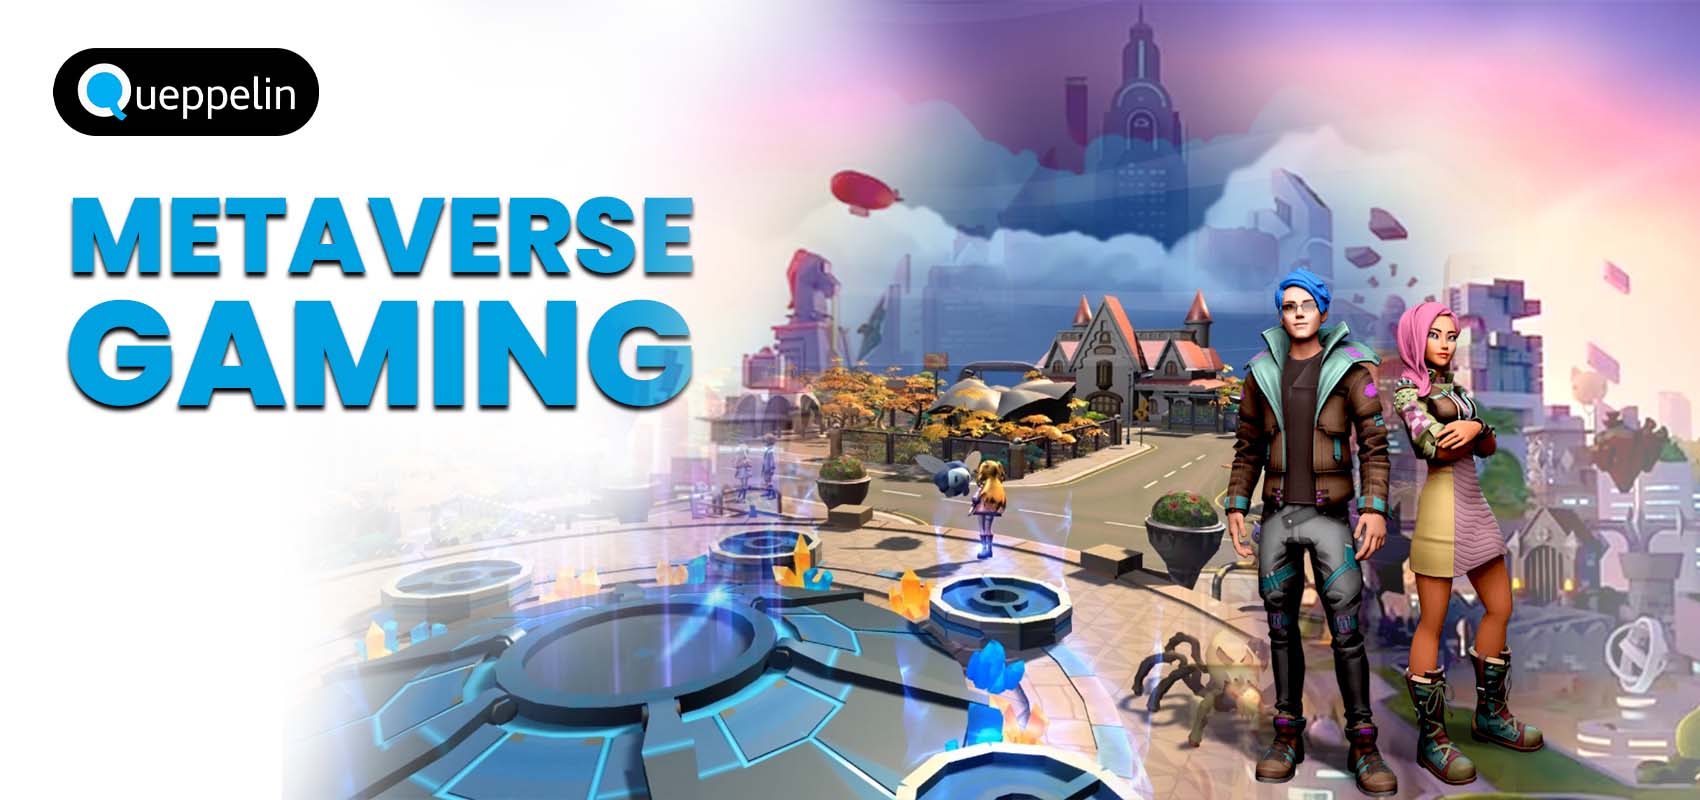 Metaverse Gaming - The Future of Gaming - Queppelin